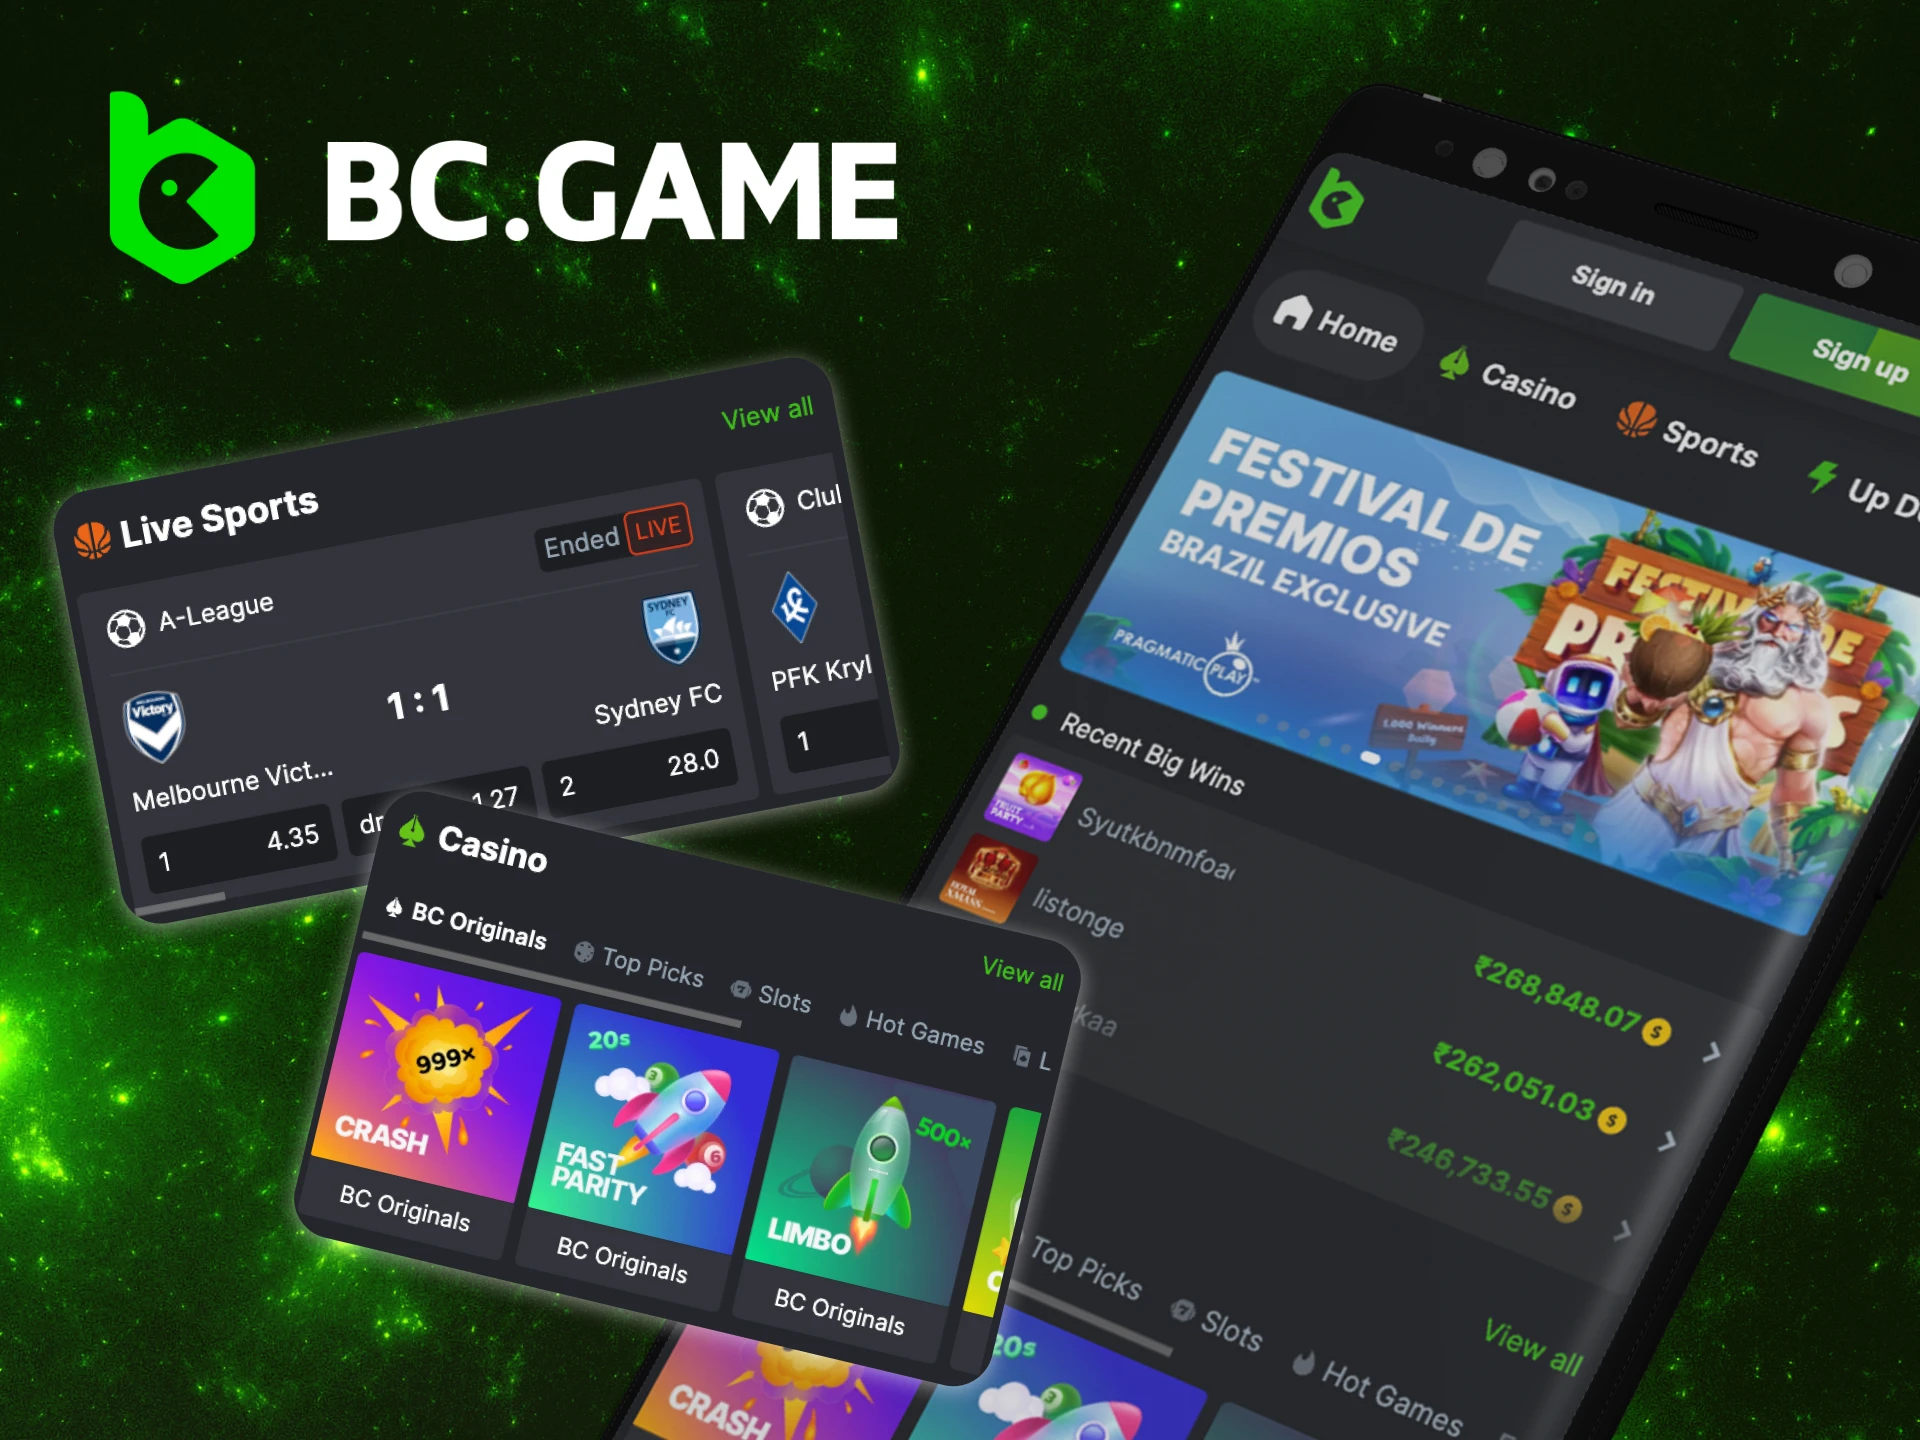 What are the benefits of the BC Game app for Indian players.